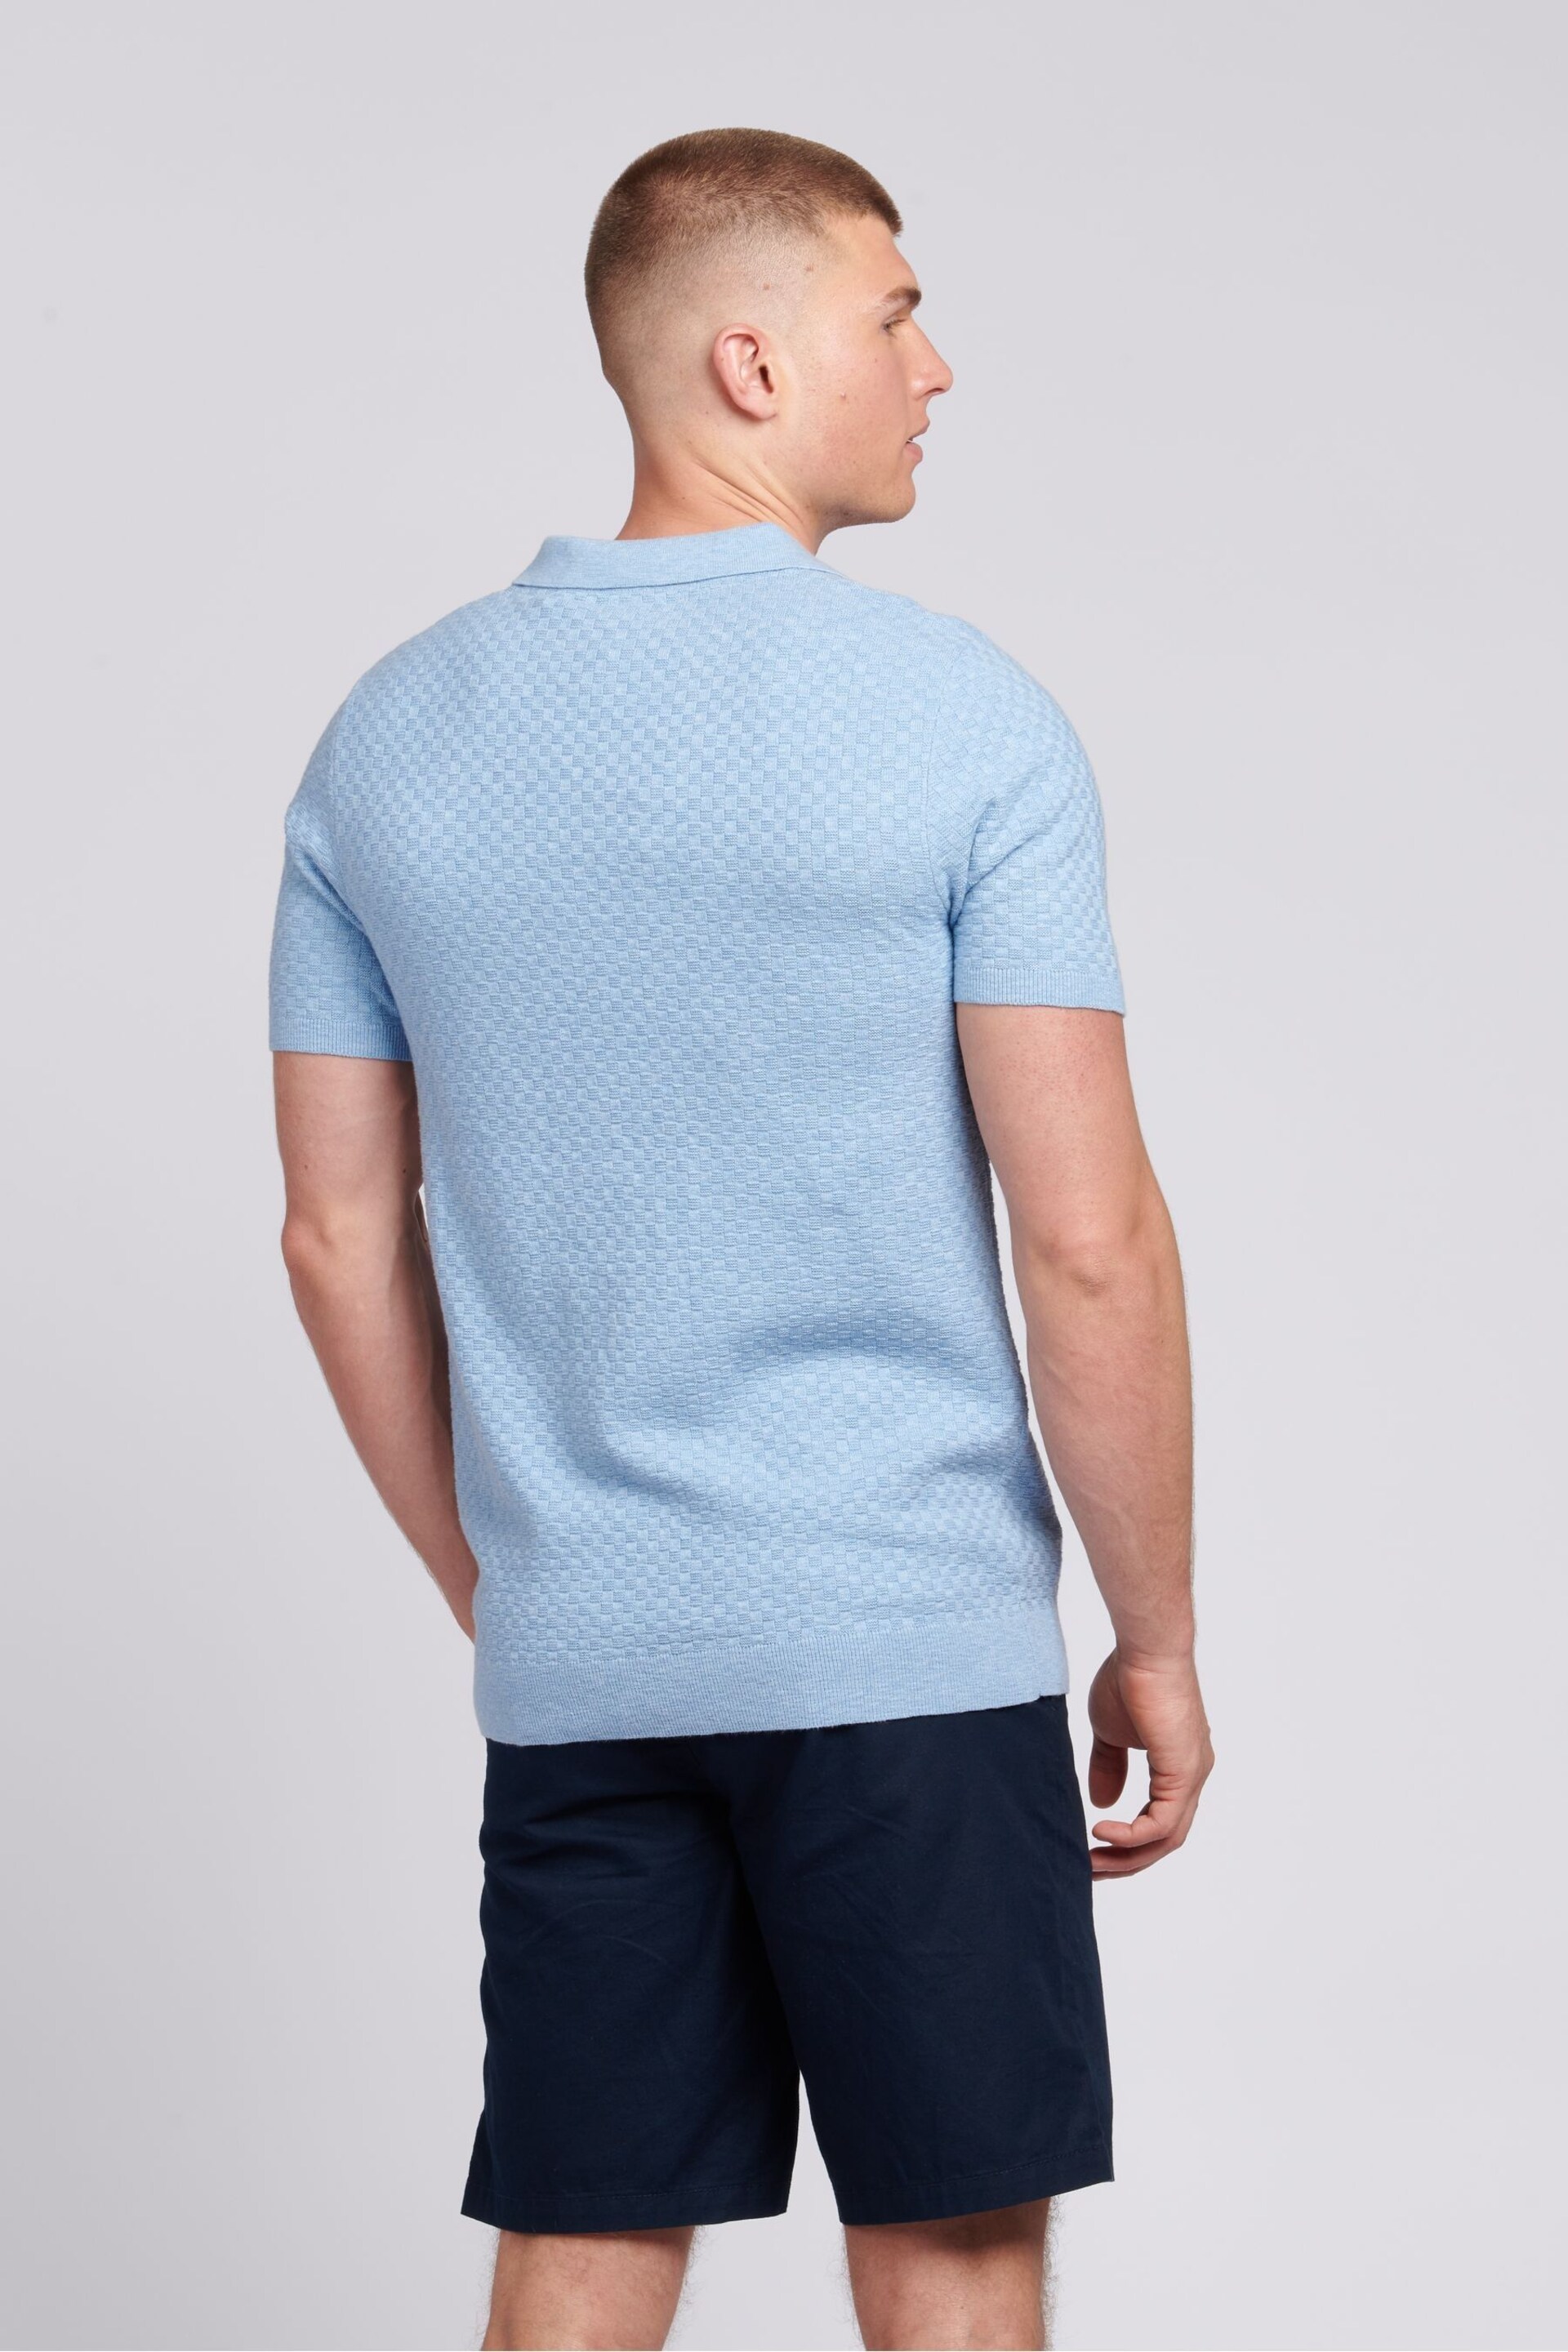 U.S. Polo Assn. Mens Regular Fit Blue Revere Texture Knit Polo Shirt - Image 4 of 7